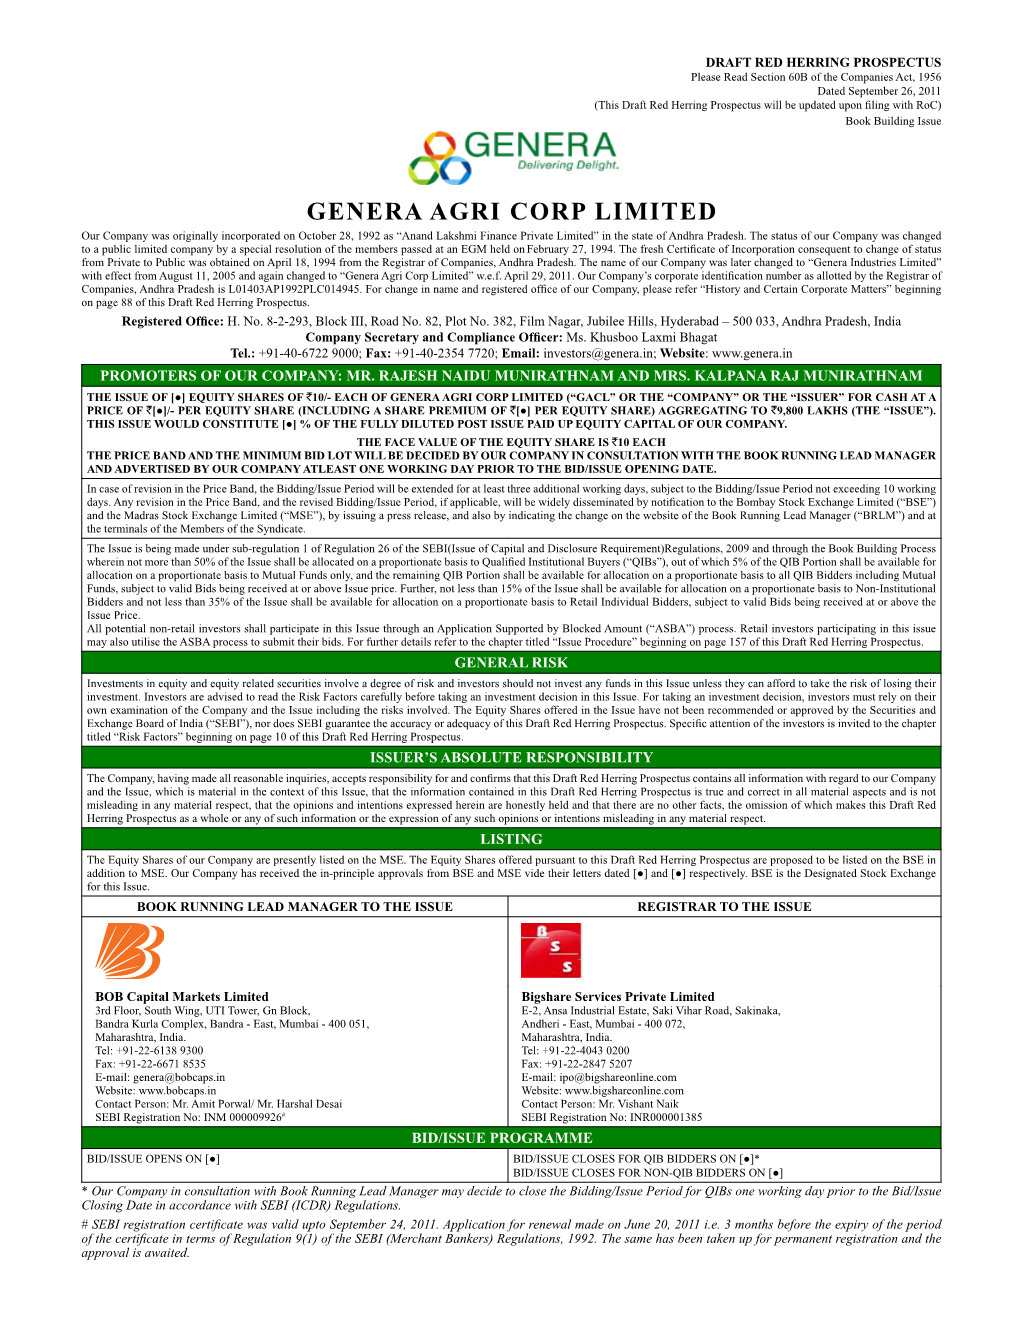 GENERA AGRI CORP LIMITED Our Company Was Originally Incorporated on October 28, 1992 As “Anand Lakshmi Finance Private Limited” in the State of Andhra Pradesh